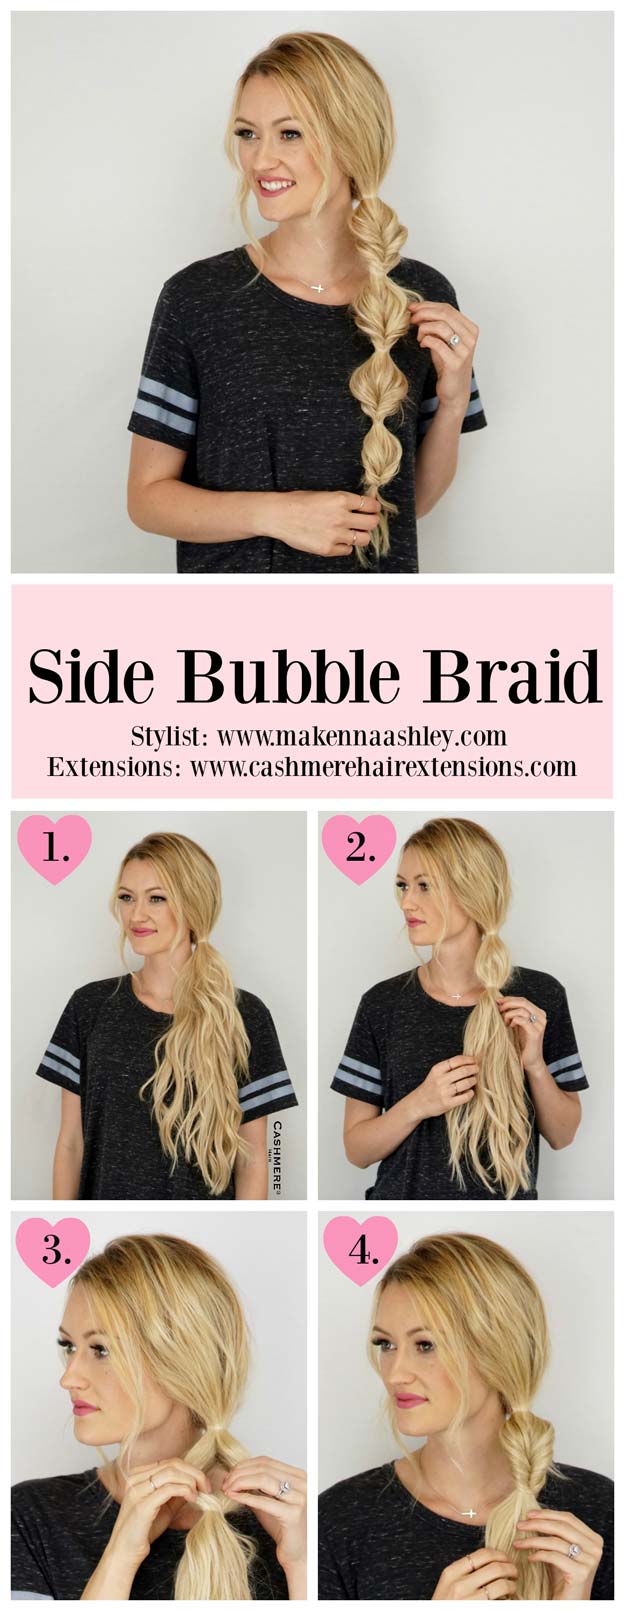 Best Hair Braiding Tutorials - Side Bubble Braid Tutorial - Easy Step by Step Tutorials for Braids - How To Braid Fishtail, French Braids, Flower Crown, Side Braids, Cornrows, Updos - Cool Braided Hairstyles for Girls, Teens and Women - School, Day and Evening, Boho, Casual and Formal Looks #hairstyles #braiding #braidingtutorials #diyhair 